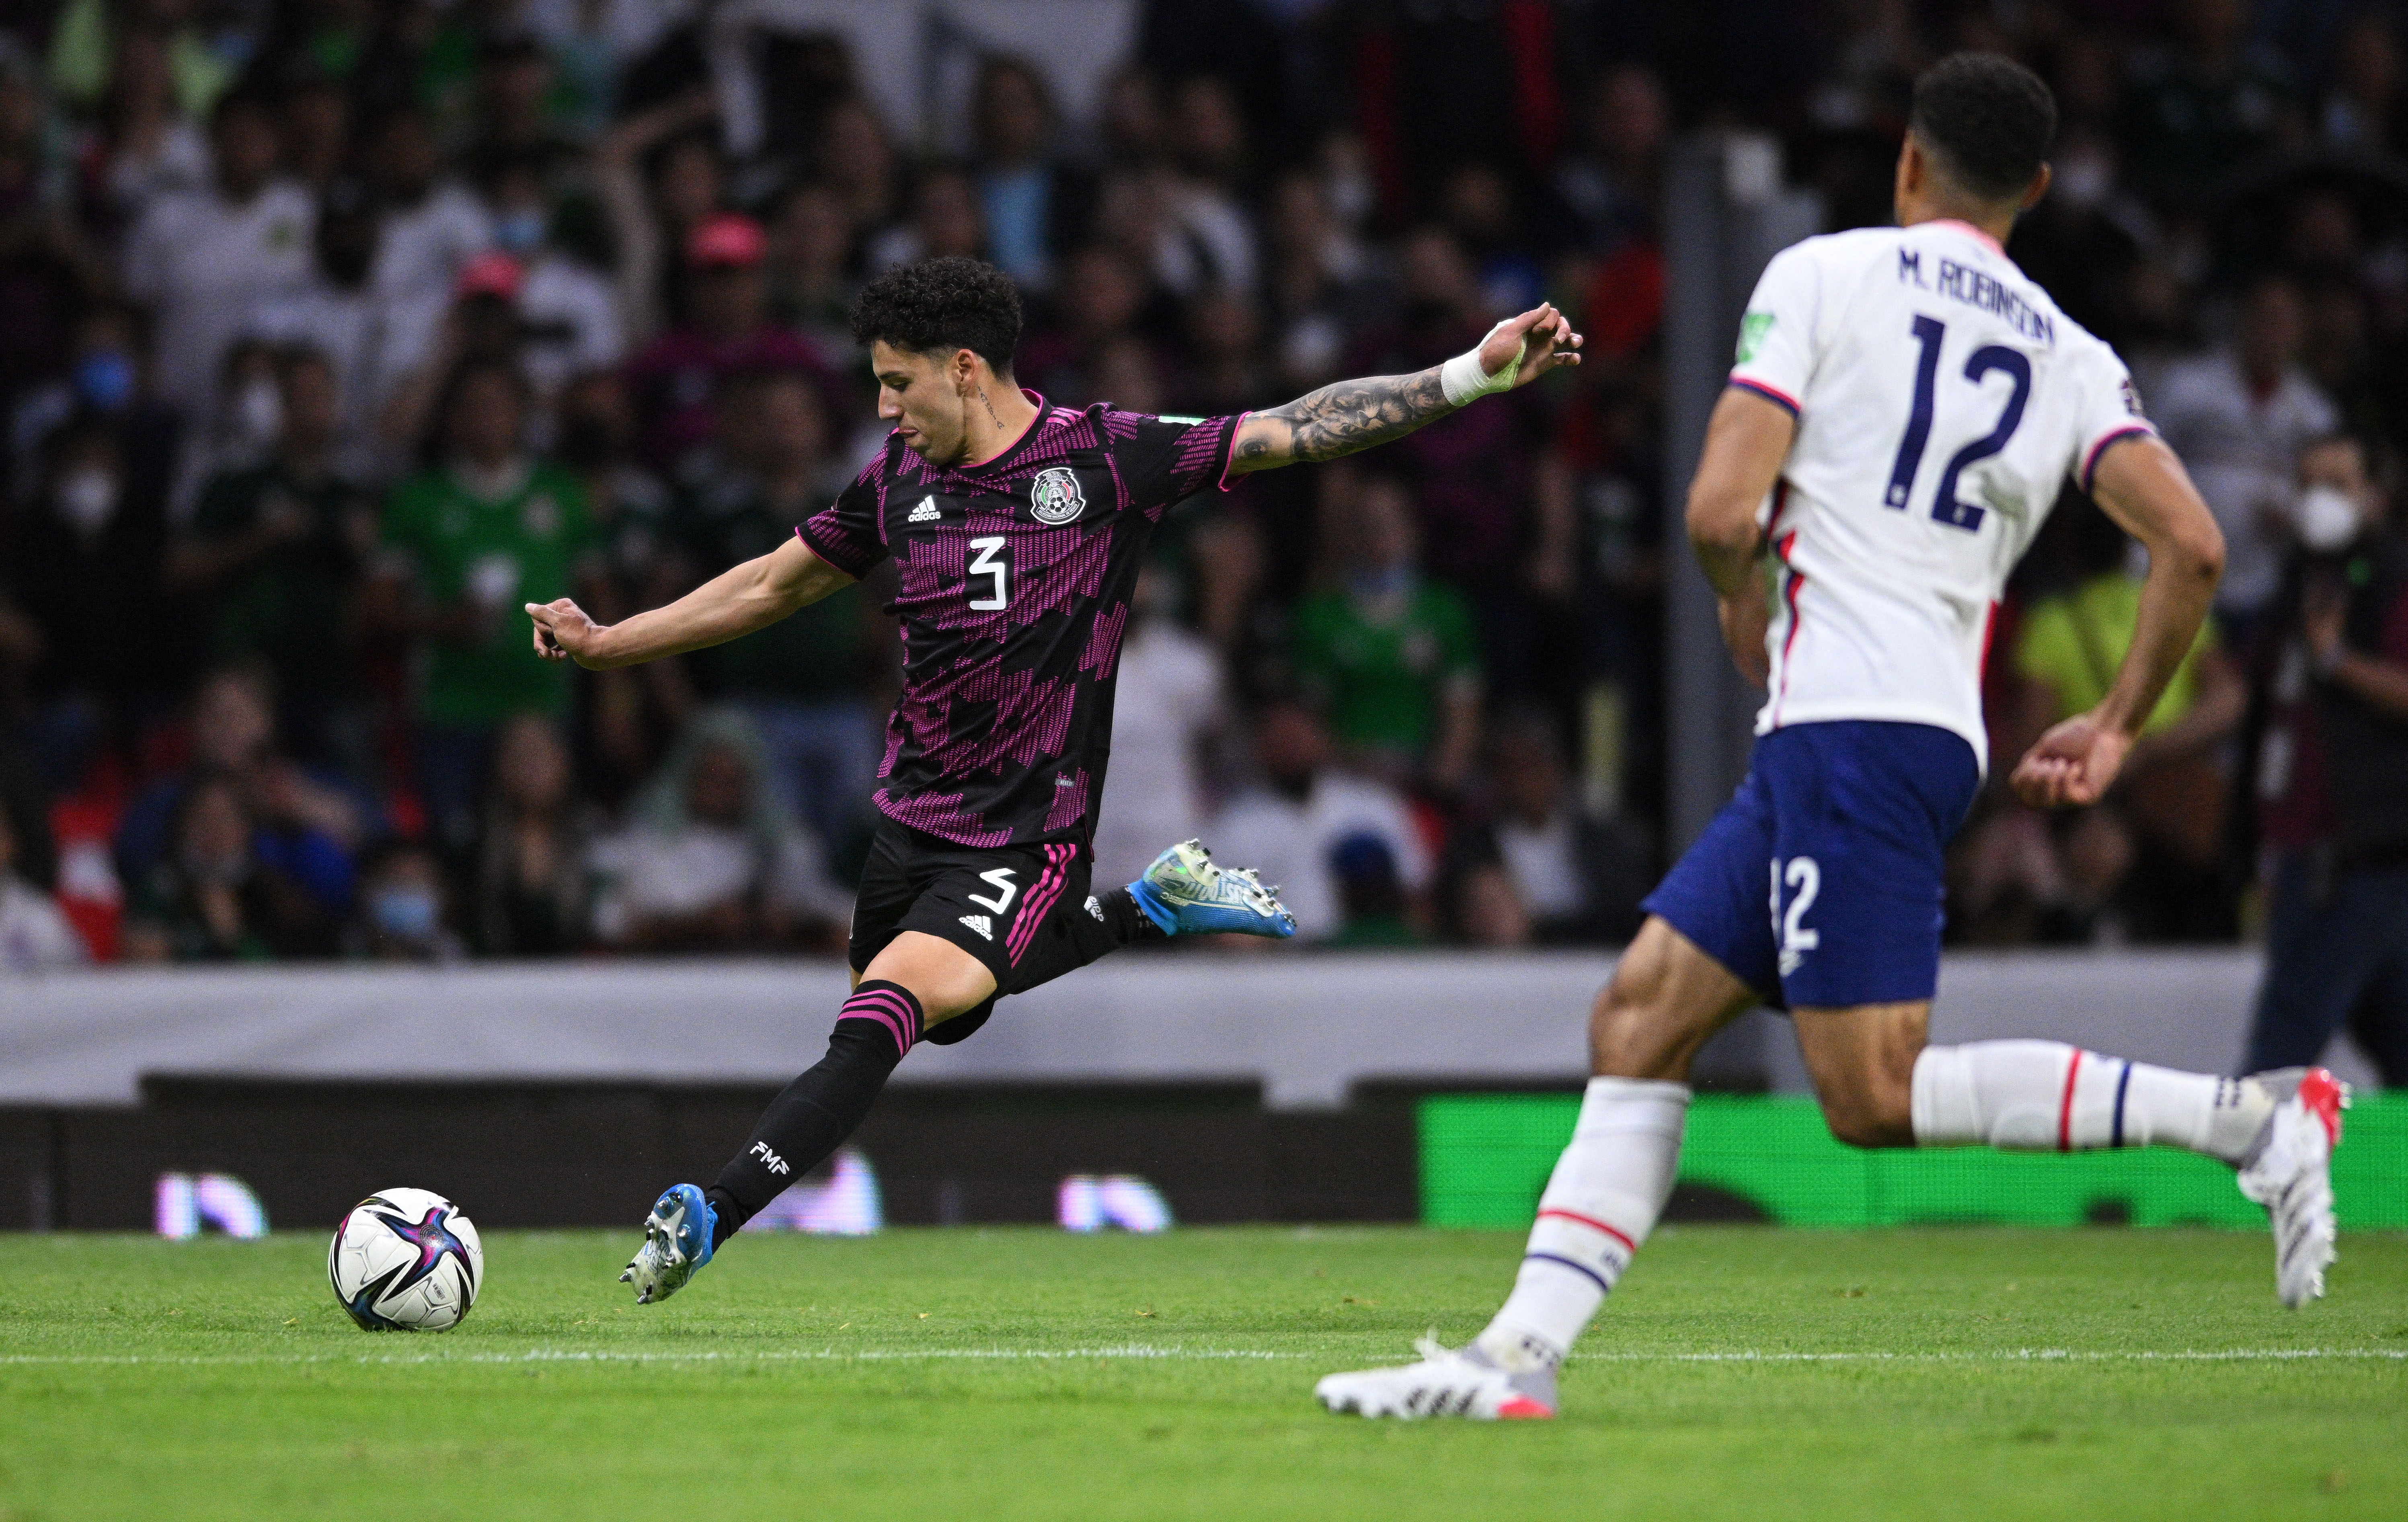 Mar 24, 2022; Mexico City, MEX; Mexico defender Jorge Sanchez (3) crosses a pass past United States defender Miles Robinson (12) during the first half during a FIFA World Cup Qualifier soccer match at Estadio Azteca. Mandatory Credit: Orlando Ramirez-USA TODAY Sports